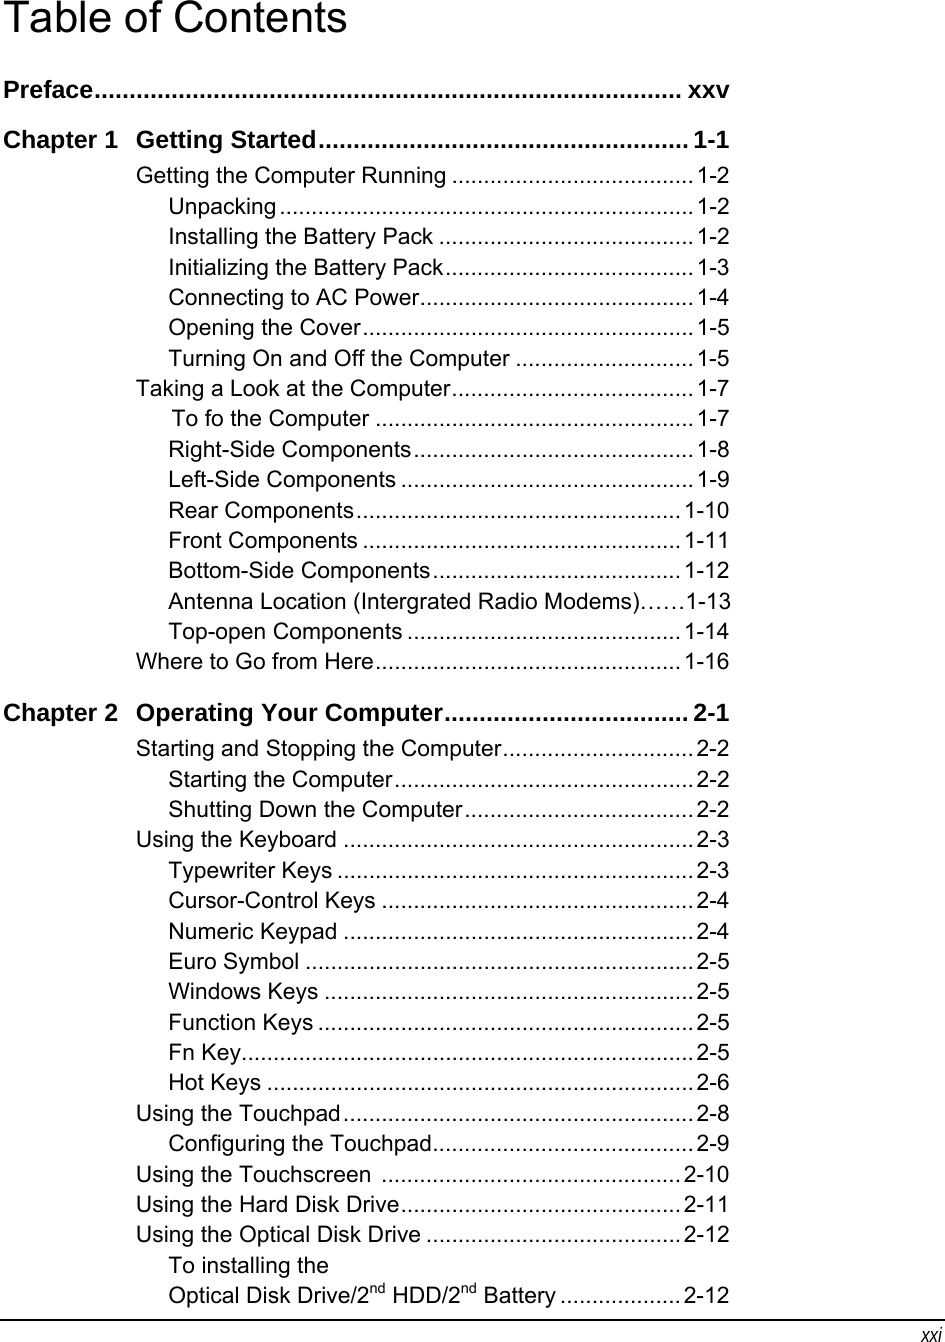 xxi Table of Contents Preface.................................................................................... xxv Chapter 1  Getting Started..................................................... 1-1 Getting the Computer Running ...................................... 1-2 Unpacking.................................................................1-2 Installing the Battery Pack ........................................1-2 Initializing the Battery Pack.......................................1-3 Connecting to AC Power........................................... 1-4 Opening the Cover.................................................... 1-5 Turning On and Off the Computer ............................ 1-5 Taking a Look at the Computer...................................... 1-7 To fo the Computer ..................................................1-7 Right-Side Components............................................ 1-8 Left-Side Components ..............................................1-9 Rear Components................................................... 1-10 Front Components ..................................................1-11 Bottom-Side Components....................................... 1-12 Antenna Location (Intergrated Radio Modems)……1-13 Top-open Components ...........................................1-14 Where to Go from Here................................................ 1-16 Chapter 2  Operating Your Computer................................... 2-1 Starting and Stopping the Computer.............................. 2-2 Starting the Computer............................................... 2-2 Shutting Down the Computer.................................... 2-2 Using the Keyboard .......................................................2-3 Typewriter Keys ........................................................2-3 Cursor-Control Keys ................................................. 2-4 Numeric Keypad ....................................................... 2-4 Euro Symbol ............................................................. 2-5 Windows Keys .......................................................... 2-5 Function Keys ...........................................................2-5 Fn Key....................................................................... 2-5 Hot Keys ................................................................... 2-6 Using the Touchpad.......................................................2-8 Configuring the Touchpad......................................... 2-9 Using the Touchscreen  ............................................... 2-10 Using the Hard Disk Drive............................................ 2-11 Using the Optical Disk Drive ........................................ 2-12 To installing the  Optical Disk Drive/2nd HDD/2nd Battery ................... 2-12 